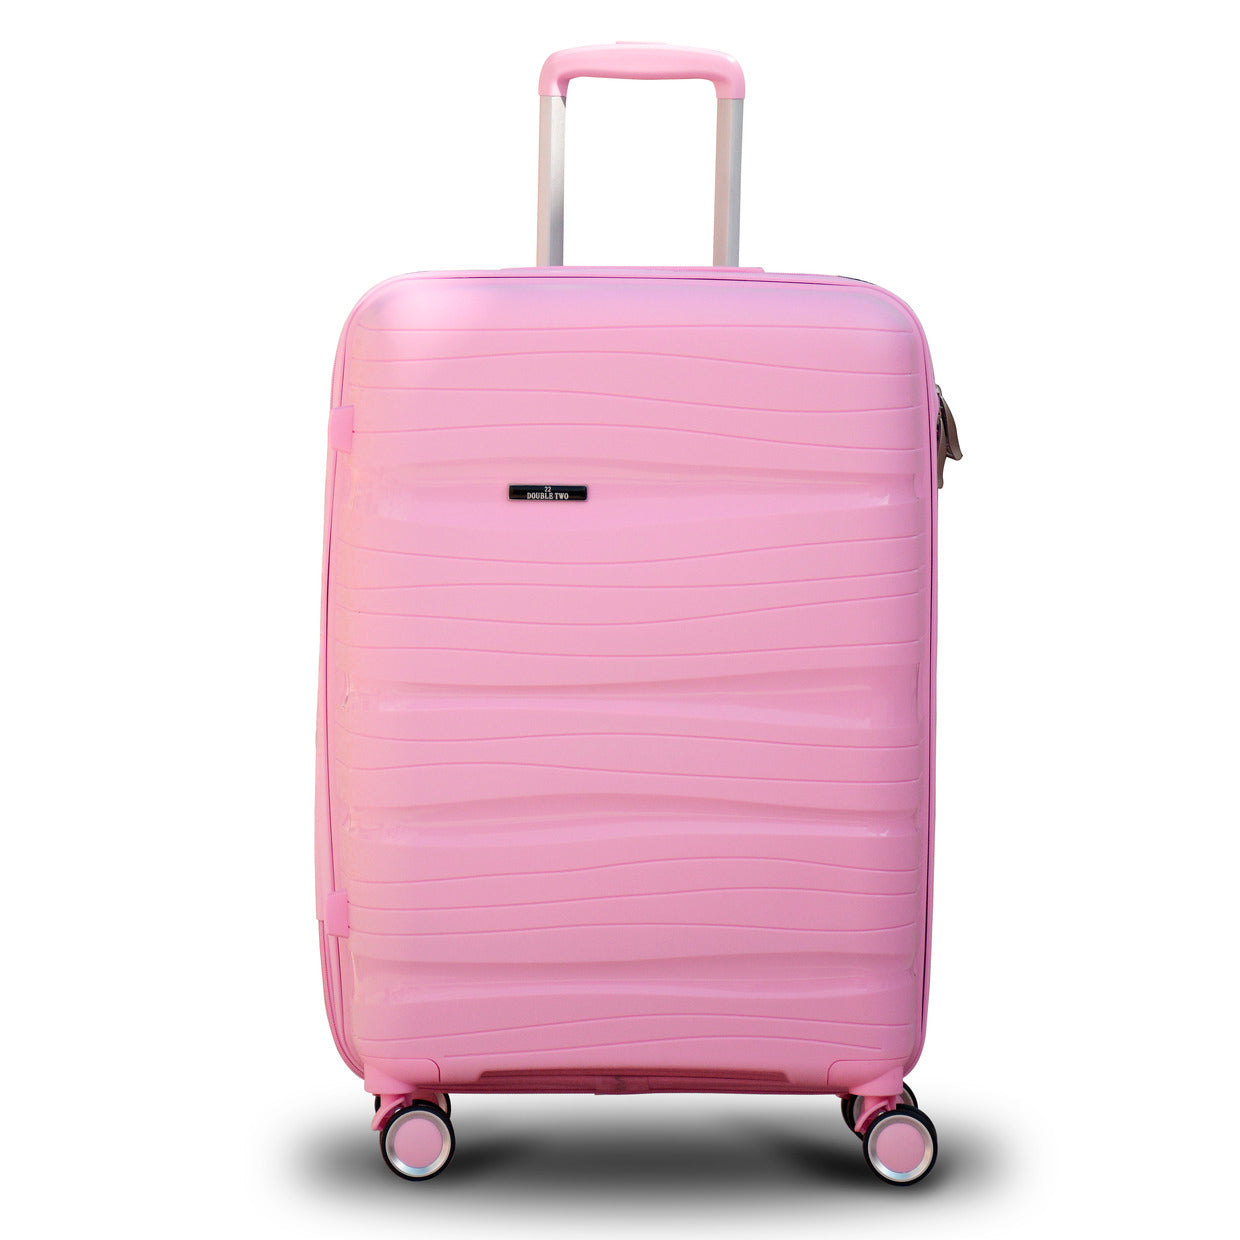 24" Pink Colour Royal PP Luggage Lightweight Hard Case Trolley Bag with Double Spinner Wheel zaappy